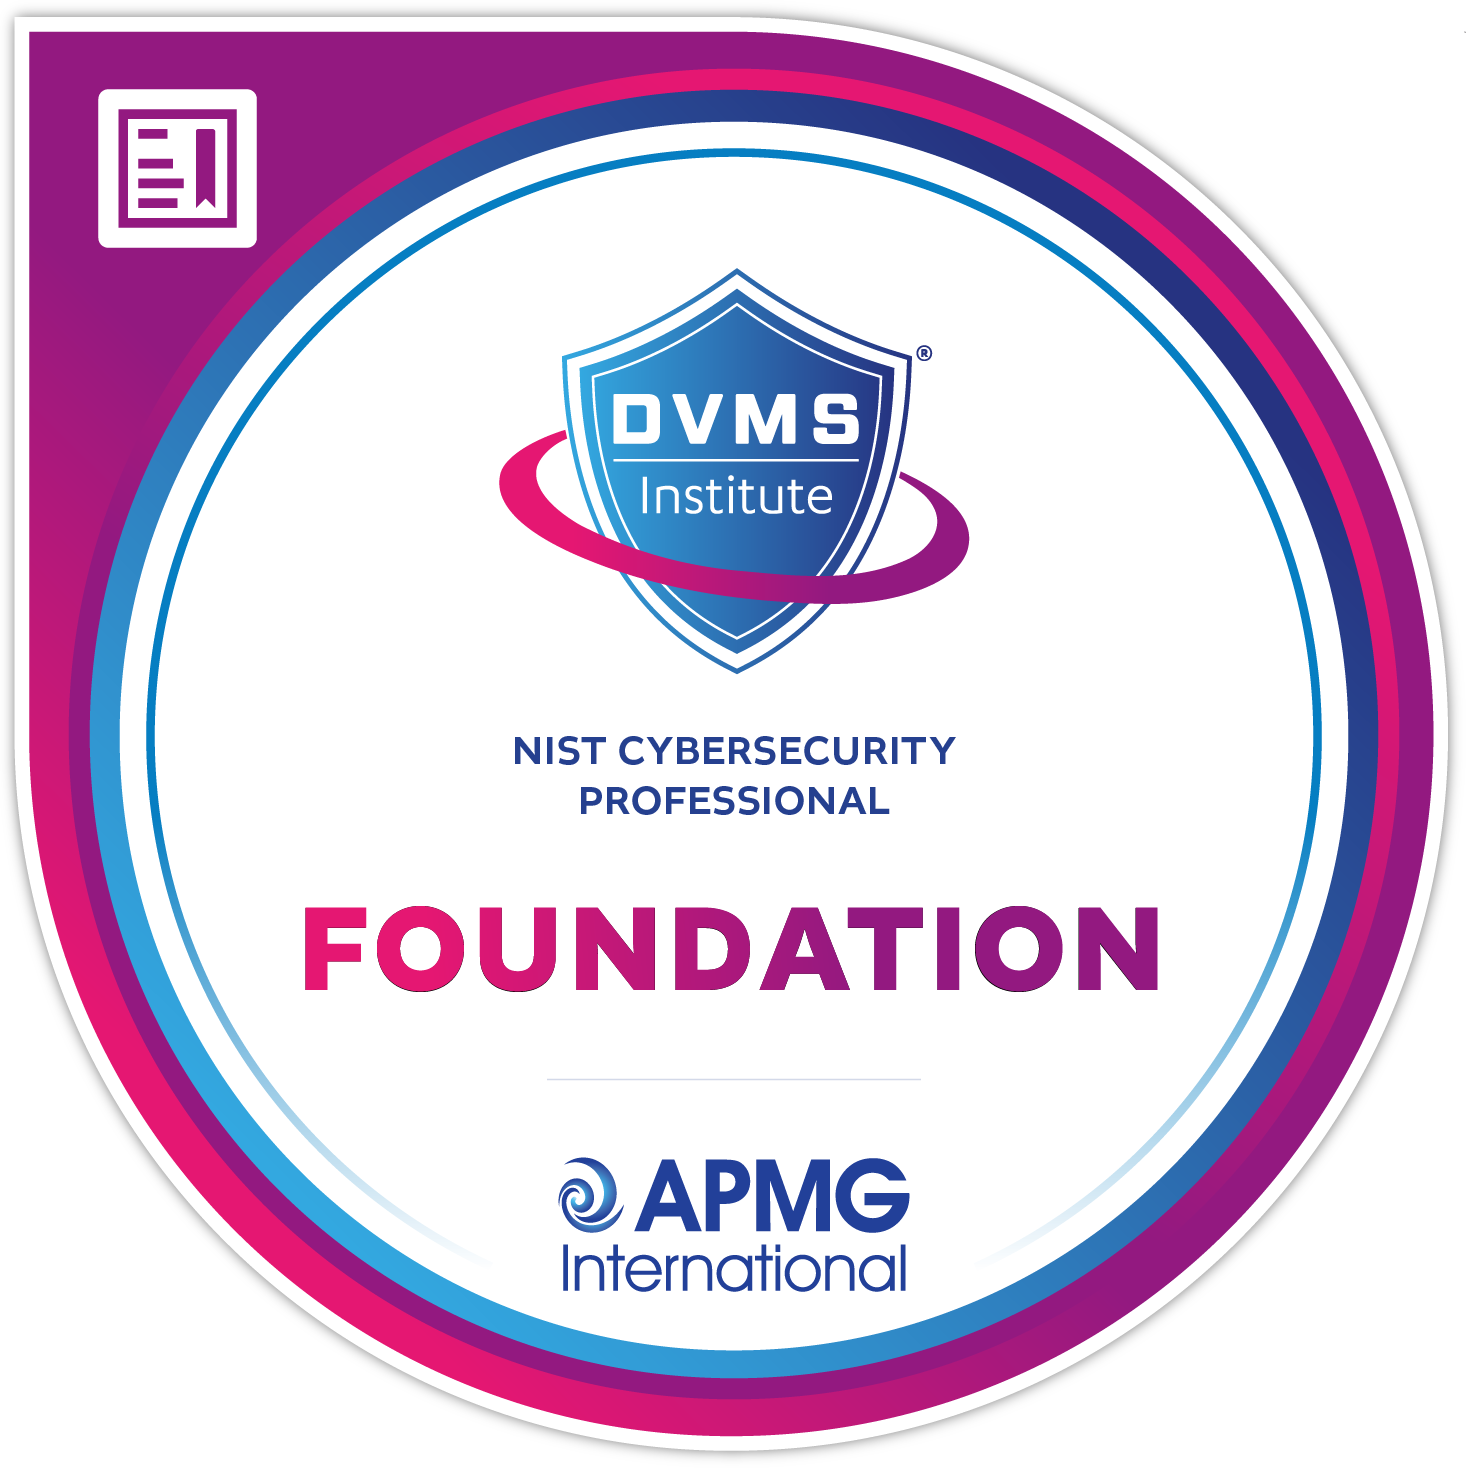 NIST Cyber Security Professional Foundation Certificate